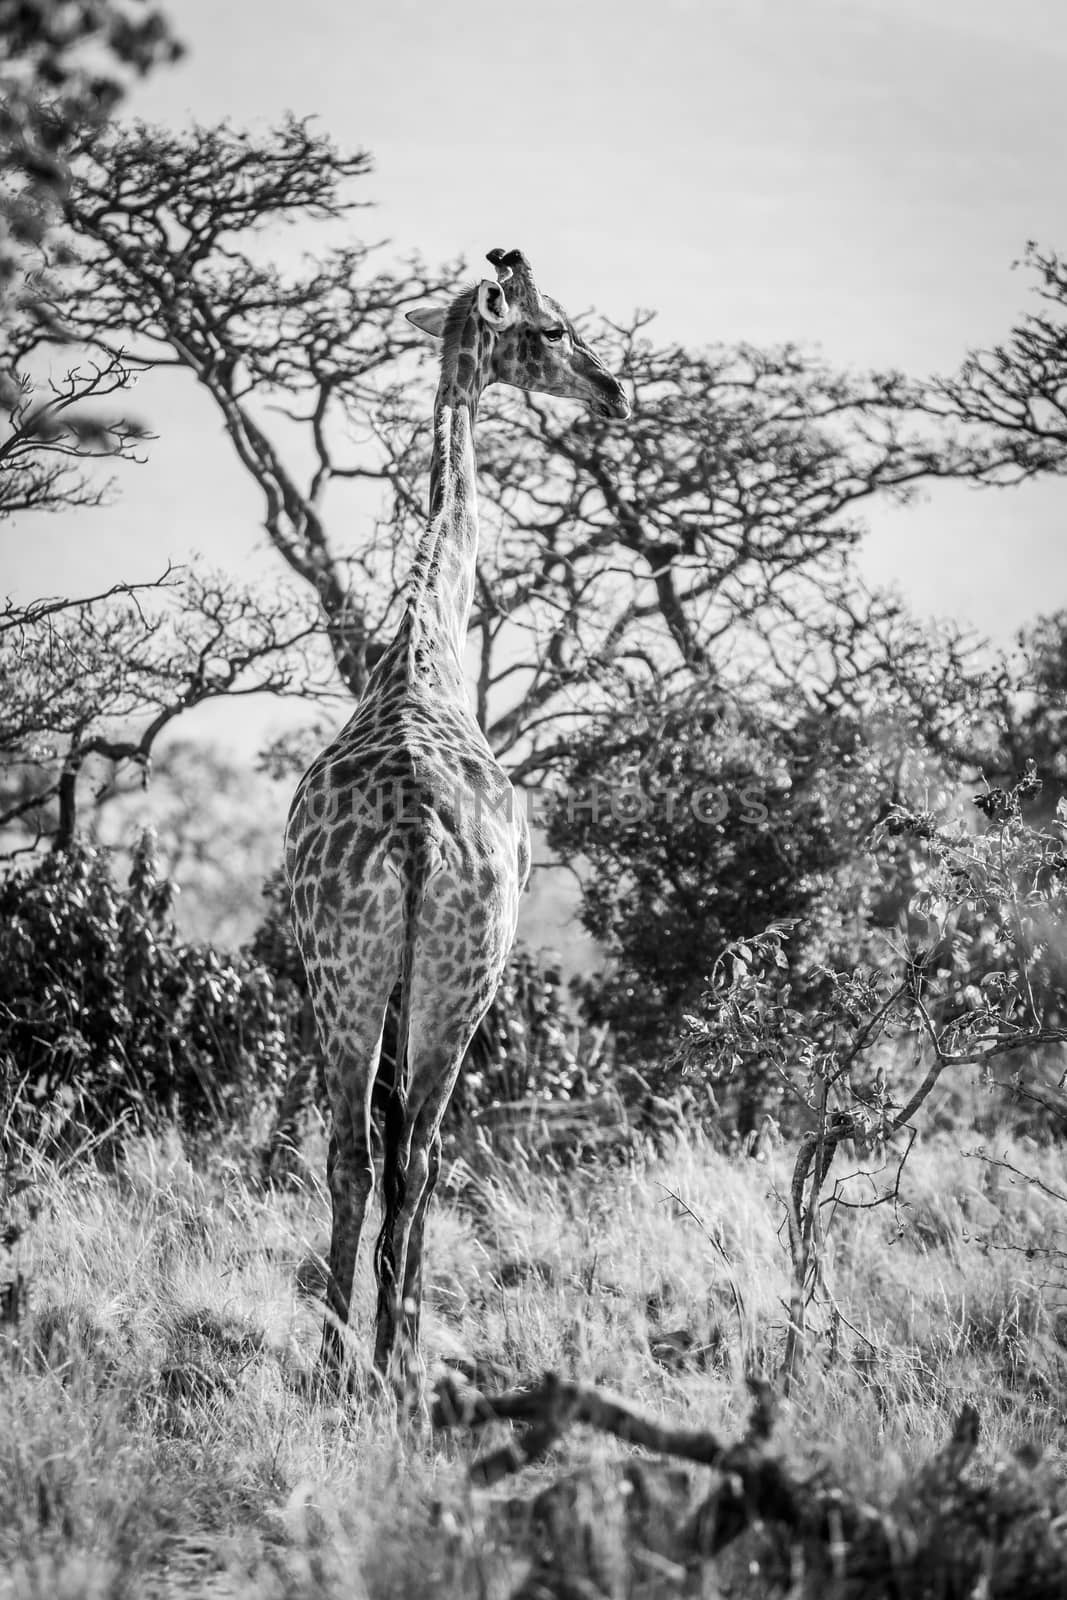 Giraffe standing in the African bush in black and white in the Welgevonden game reserve, South Africa.